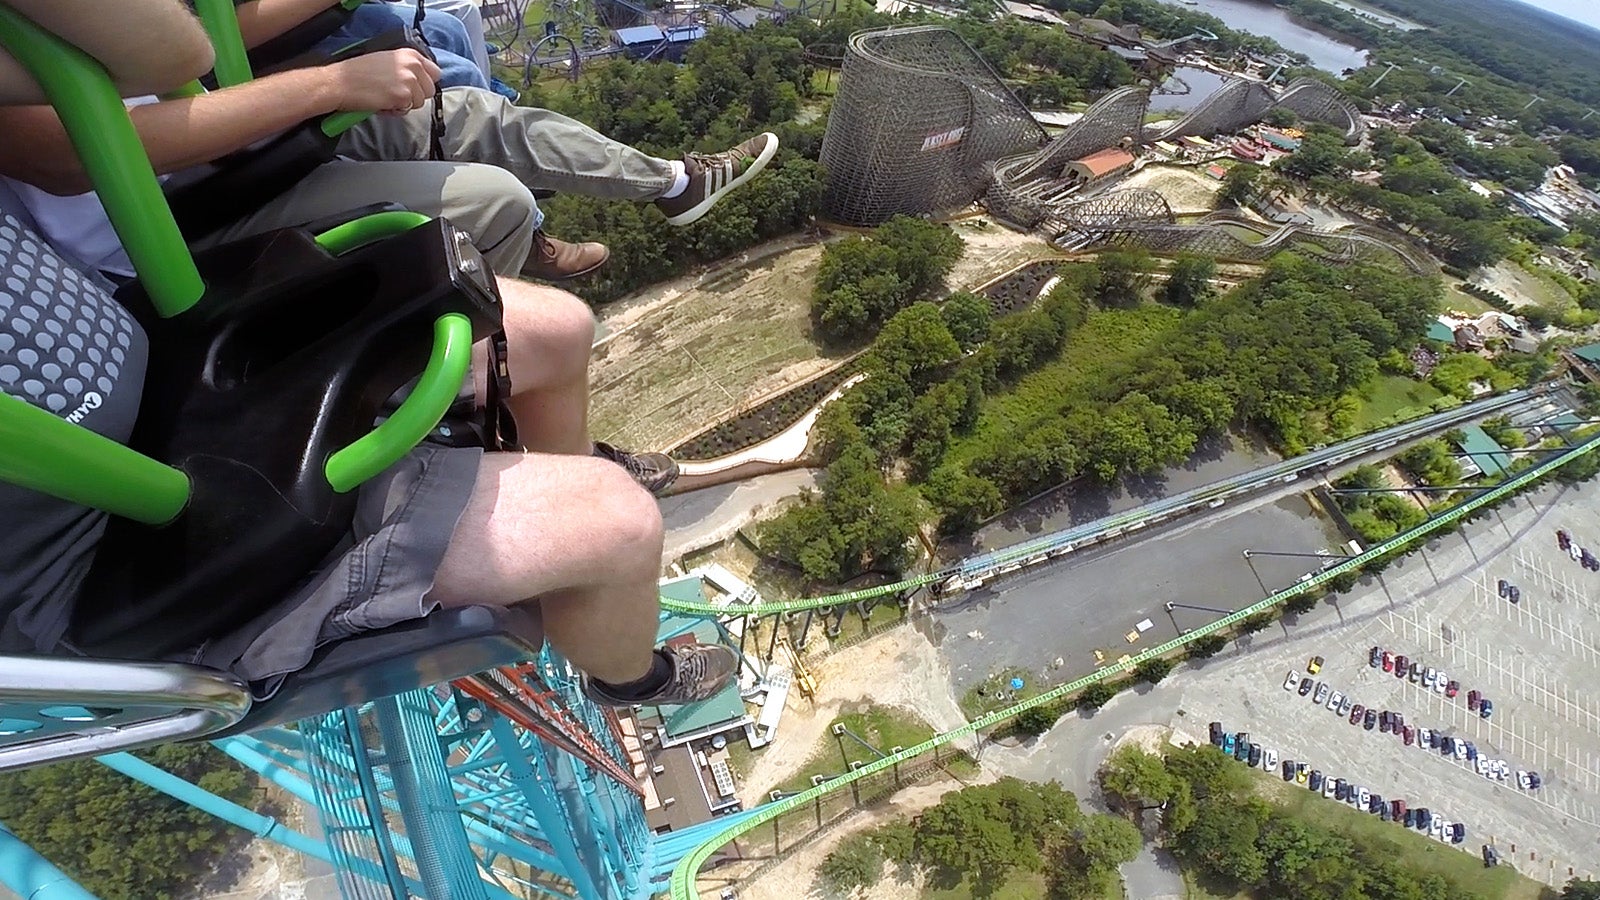 The view from the top of Six Flags Great Adventure's new drop tower